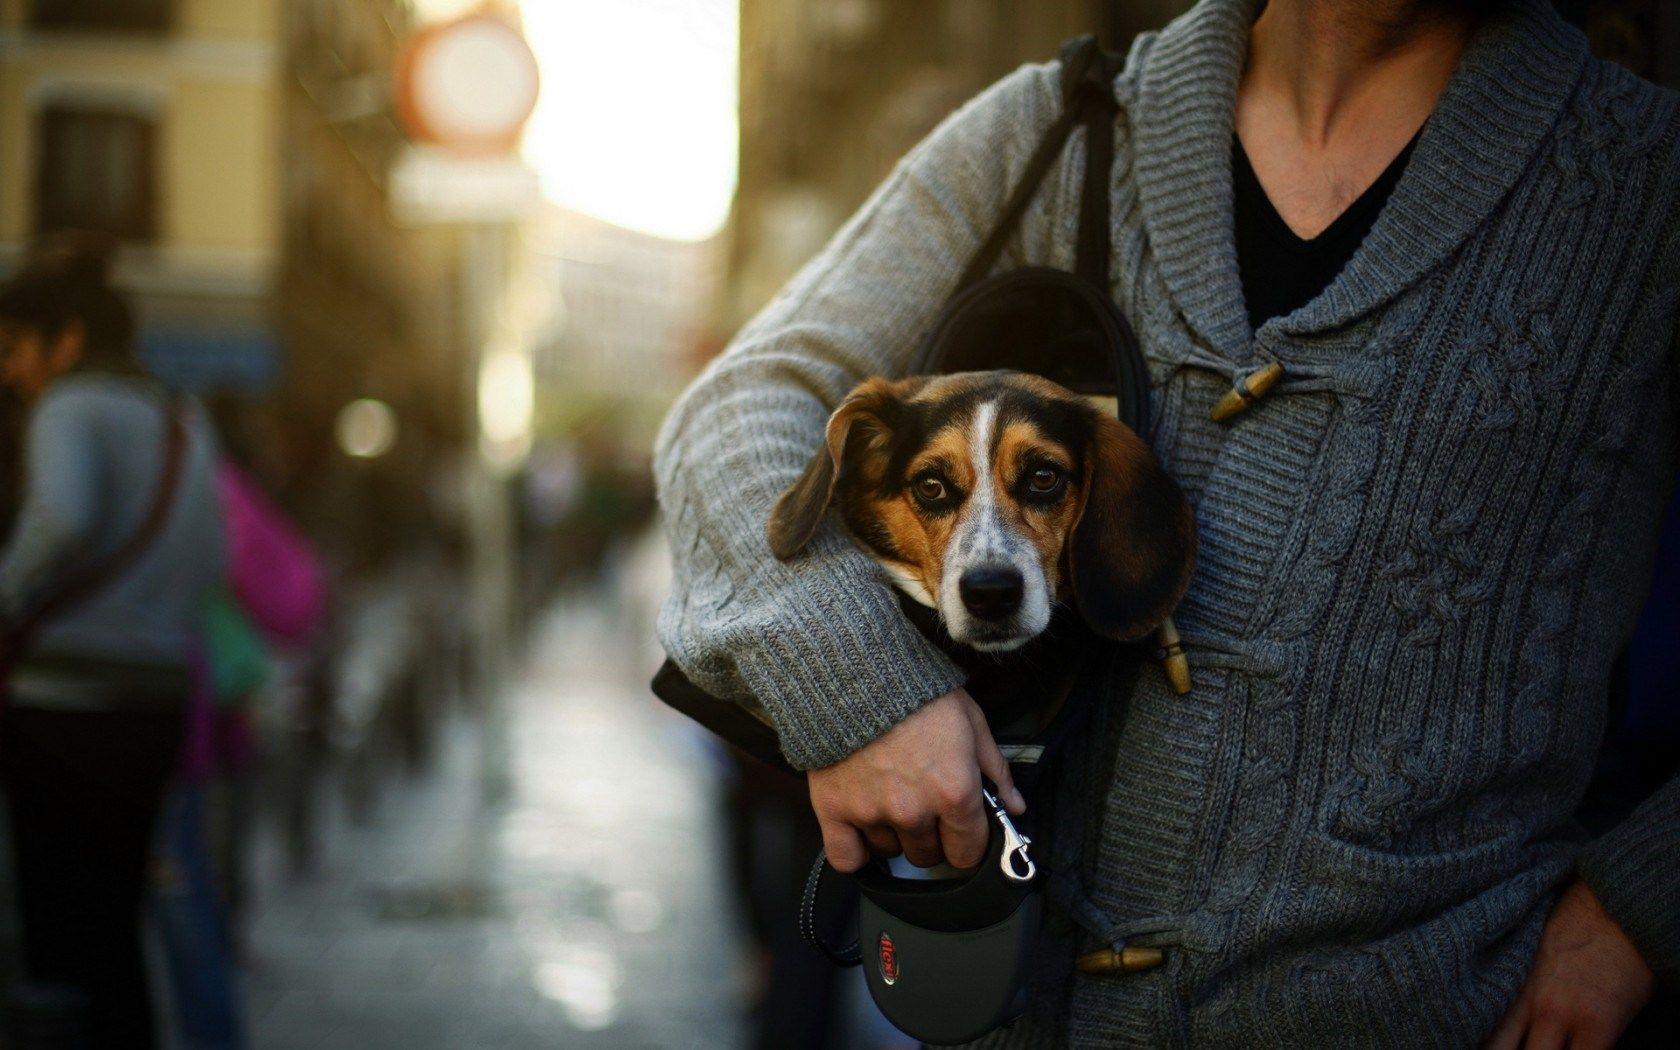 HD man and dog wallpapers  Peakpx